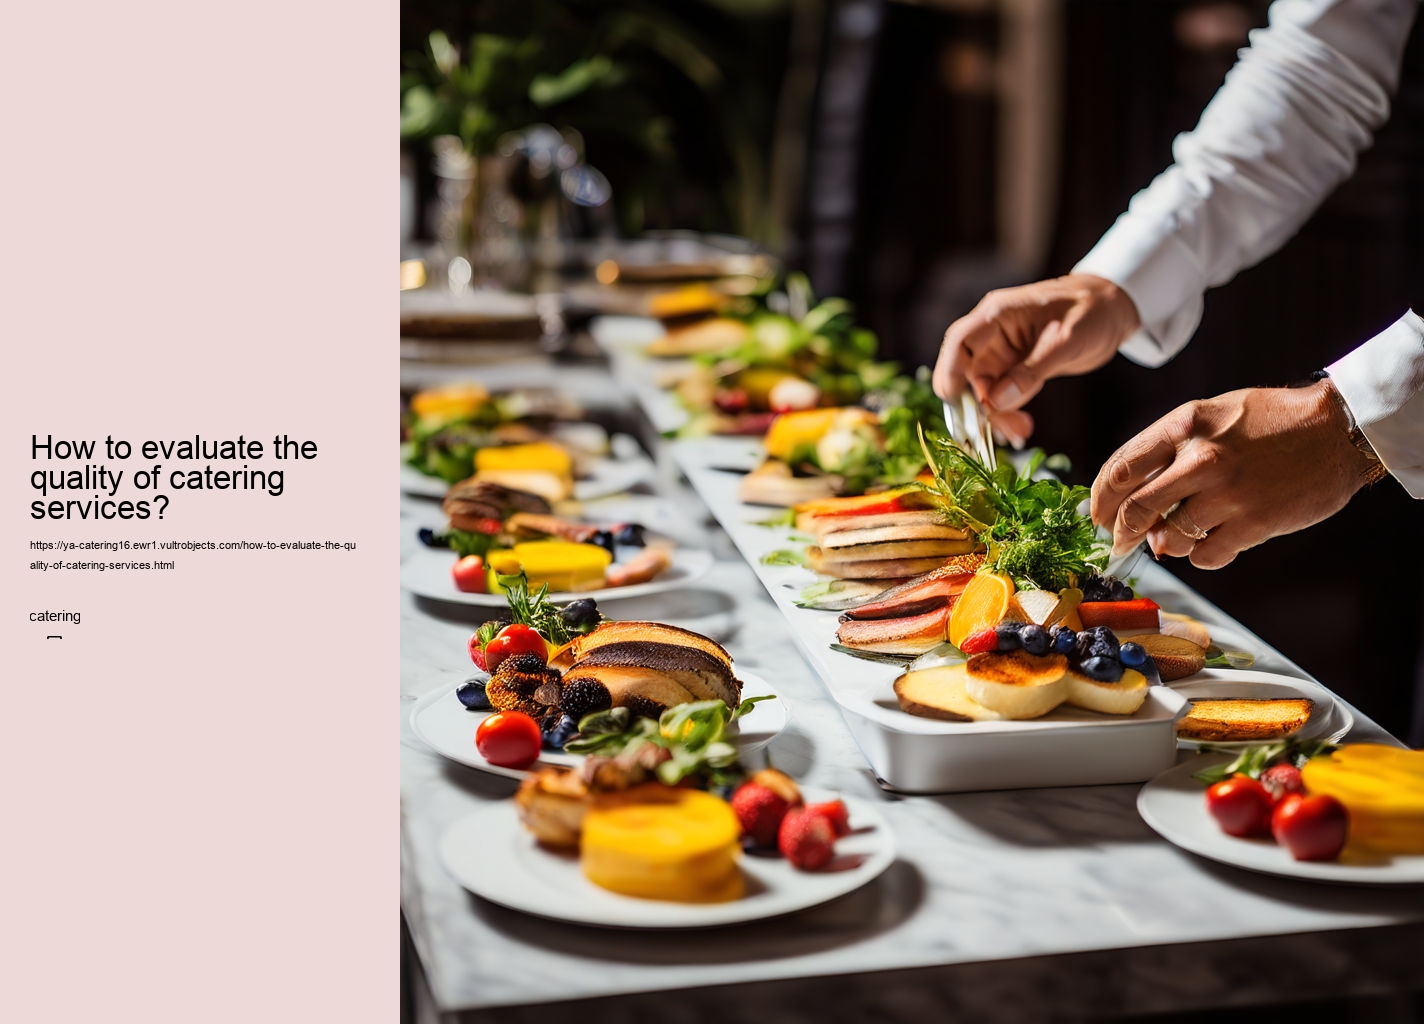 How to evaluate the quality of catering services?